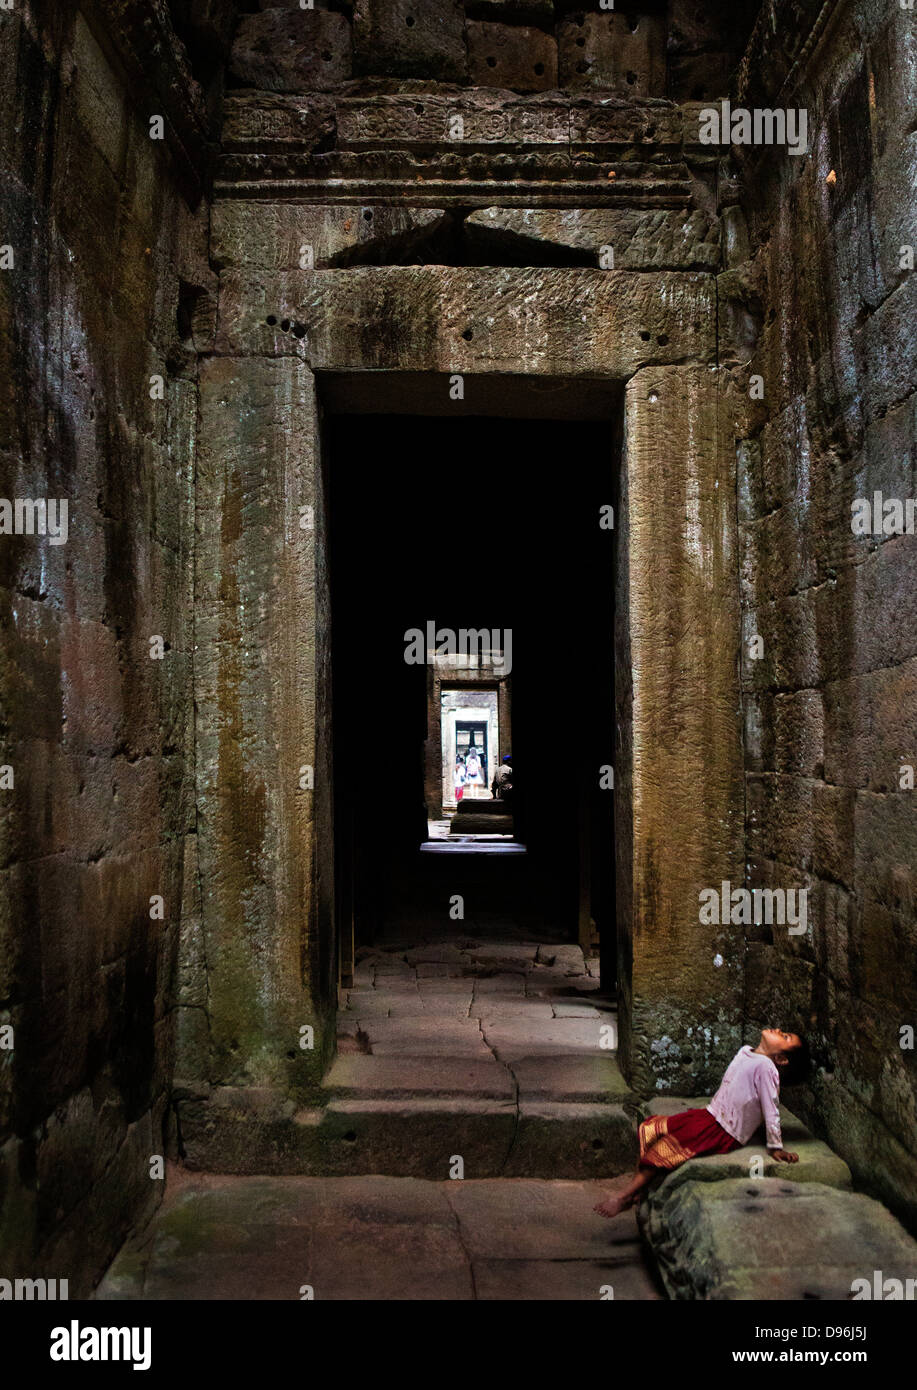 Child in the temple of Preah Khan, Ankor Wat Cambodia Stock Photo